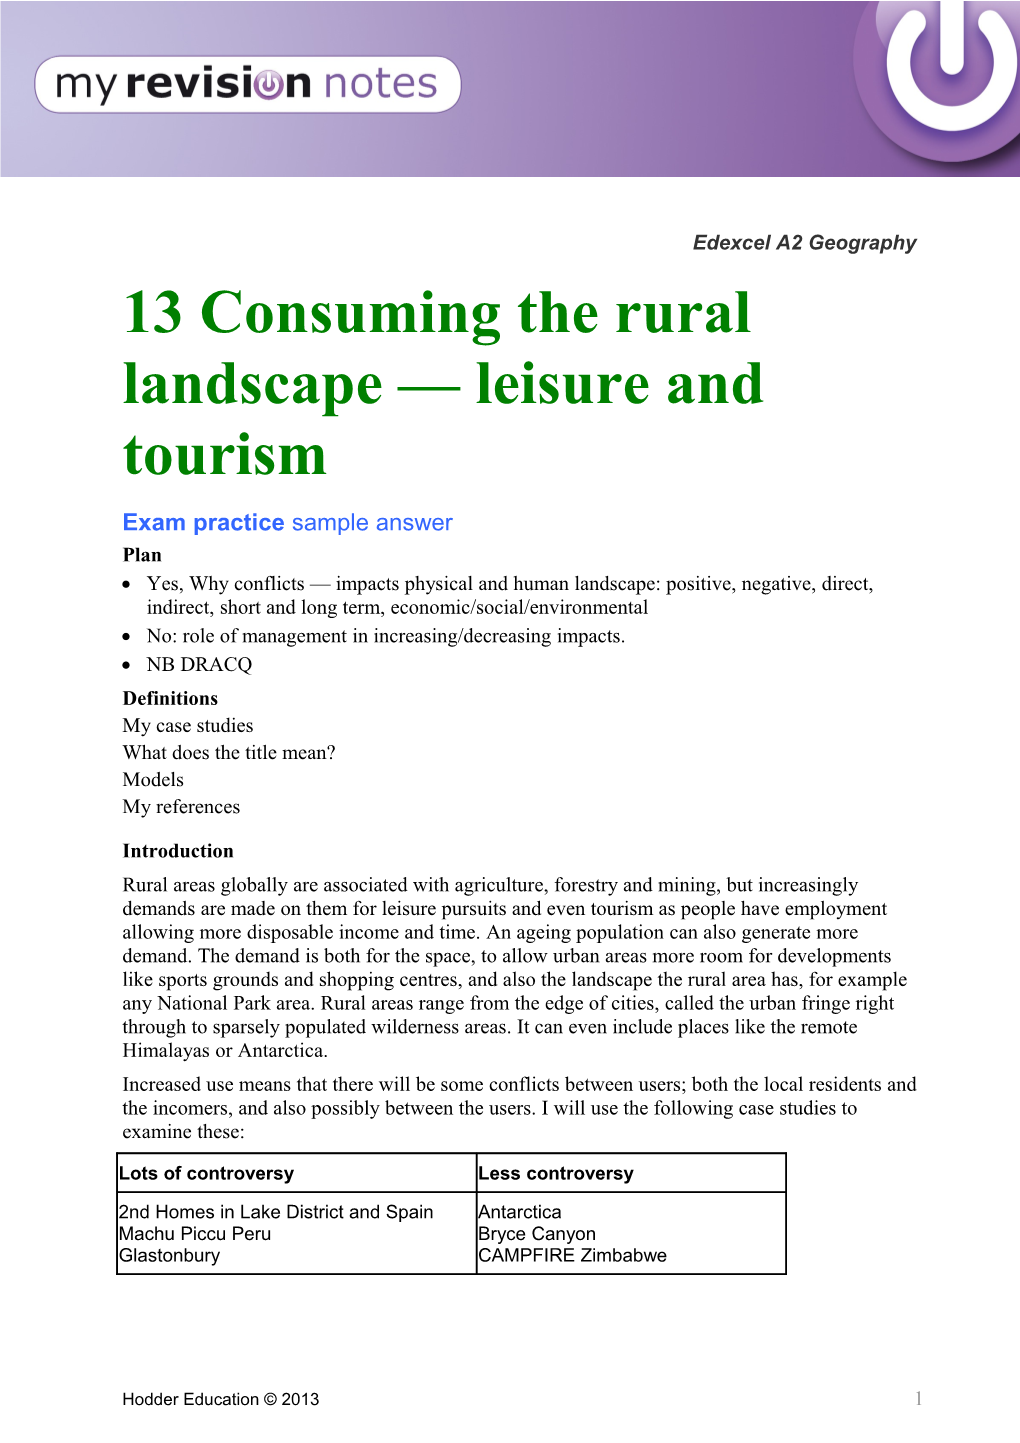 13 Consuming the Rural Landscape Leisure and Tourism